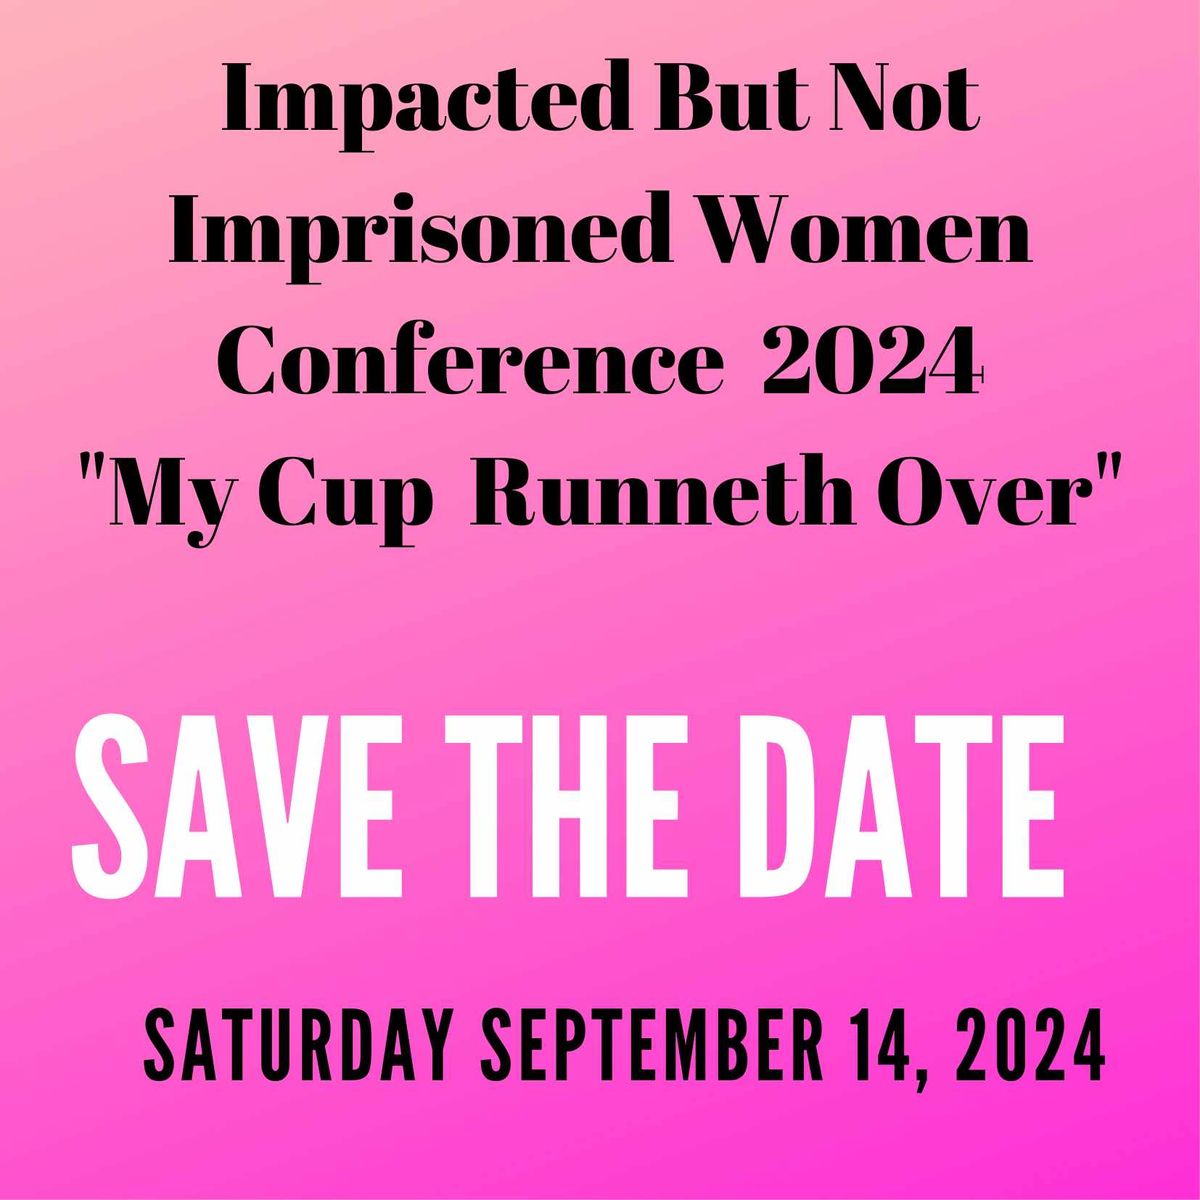 Impacted But Not Imprisoned Conference